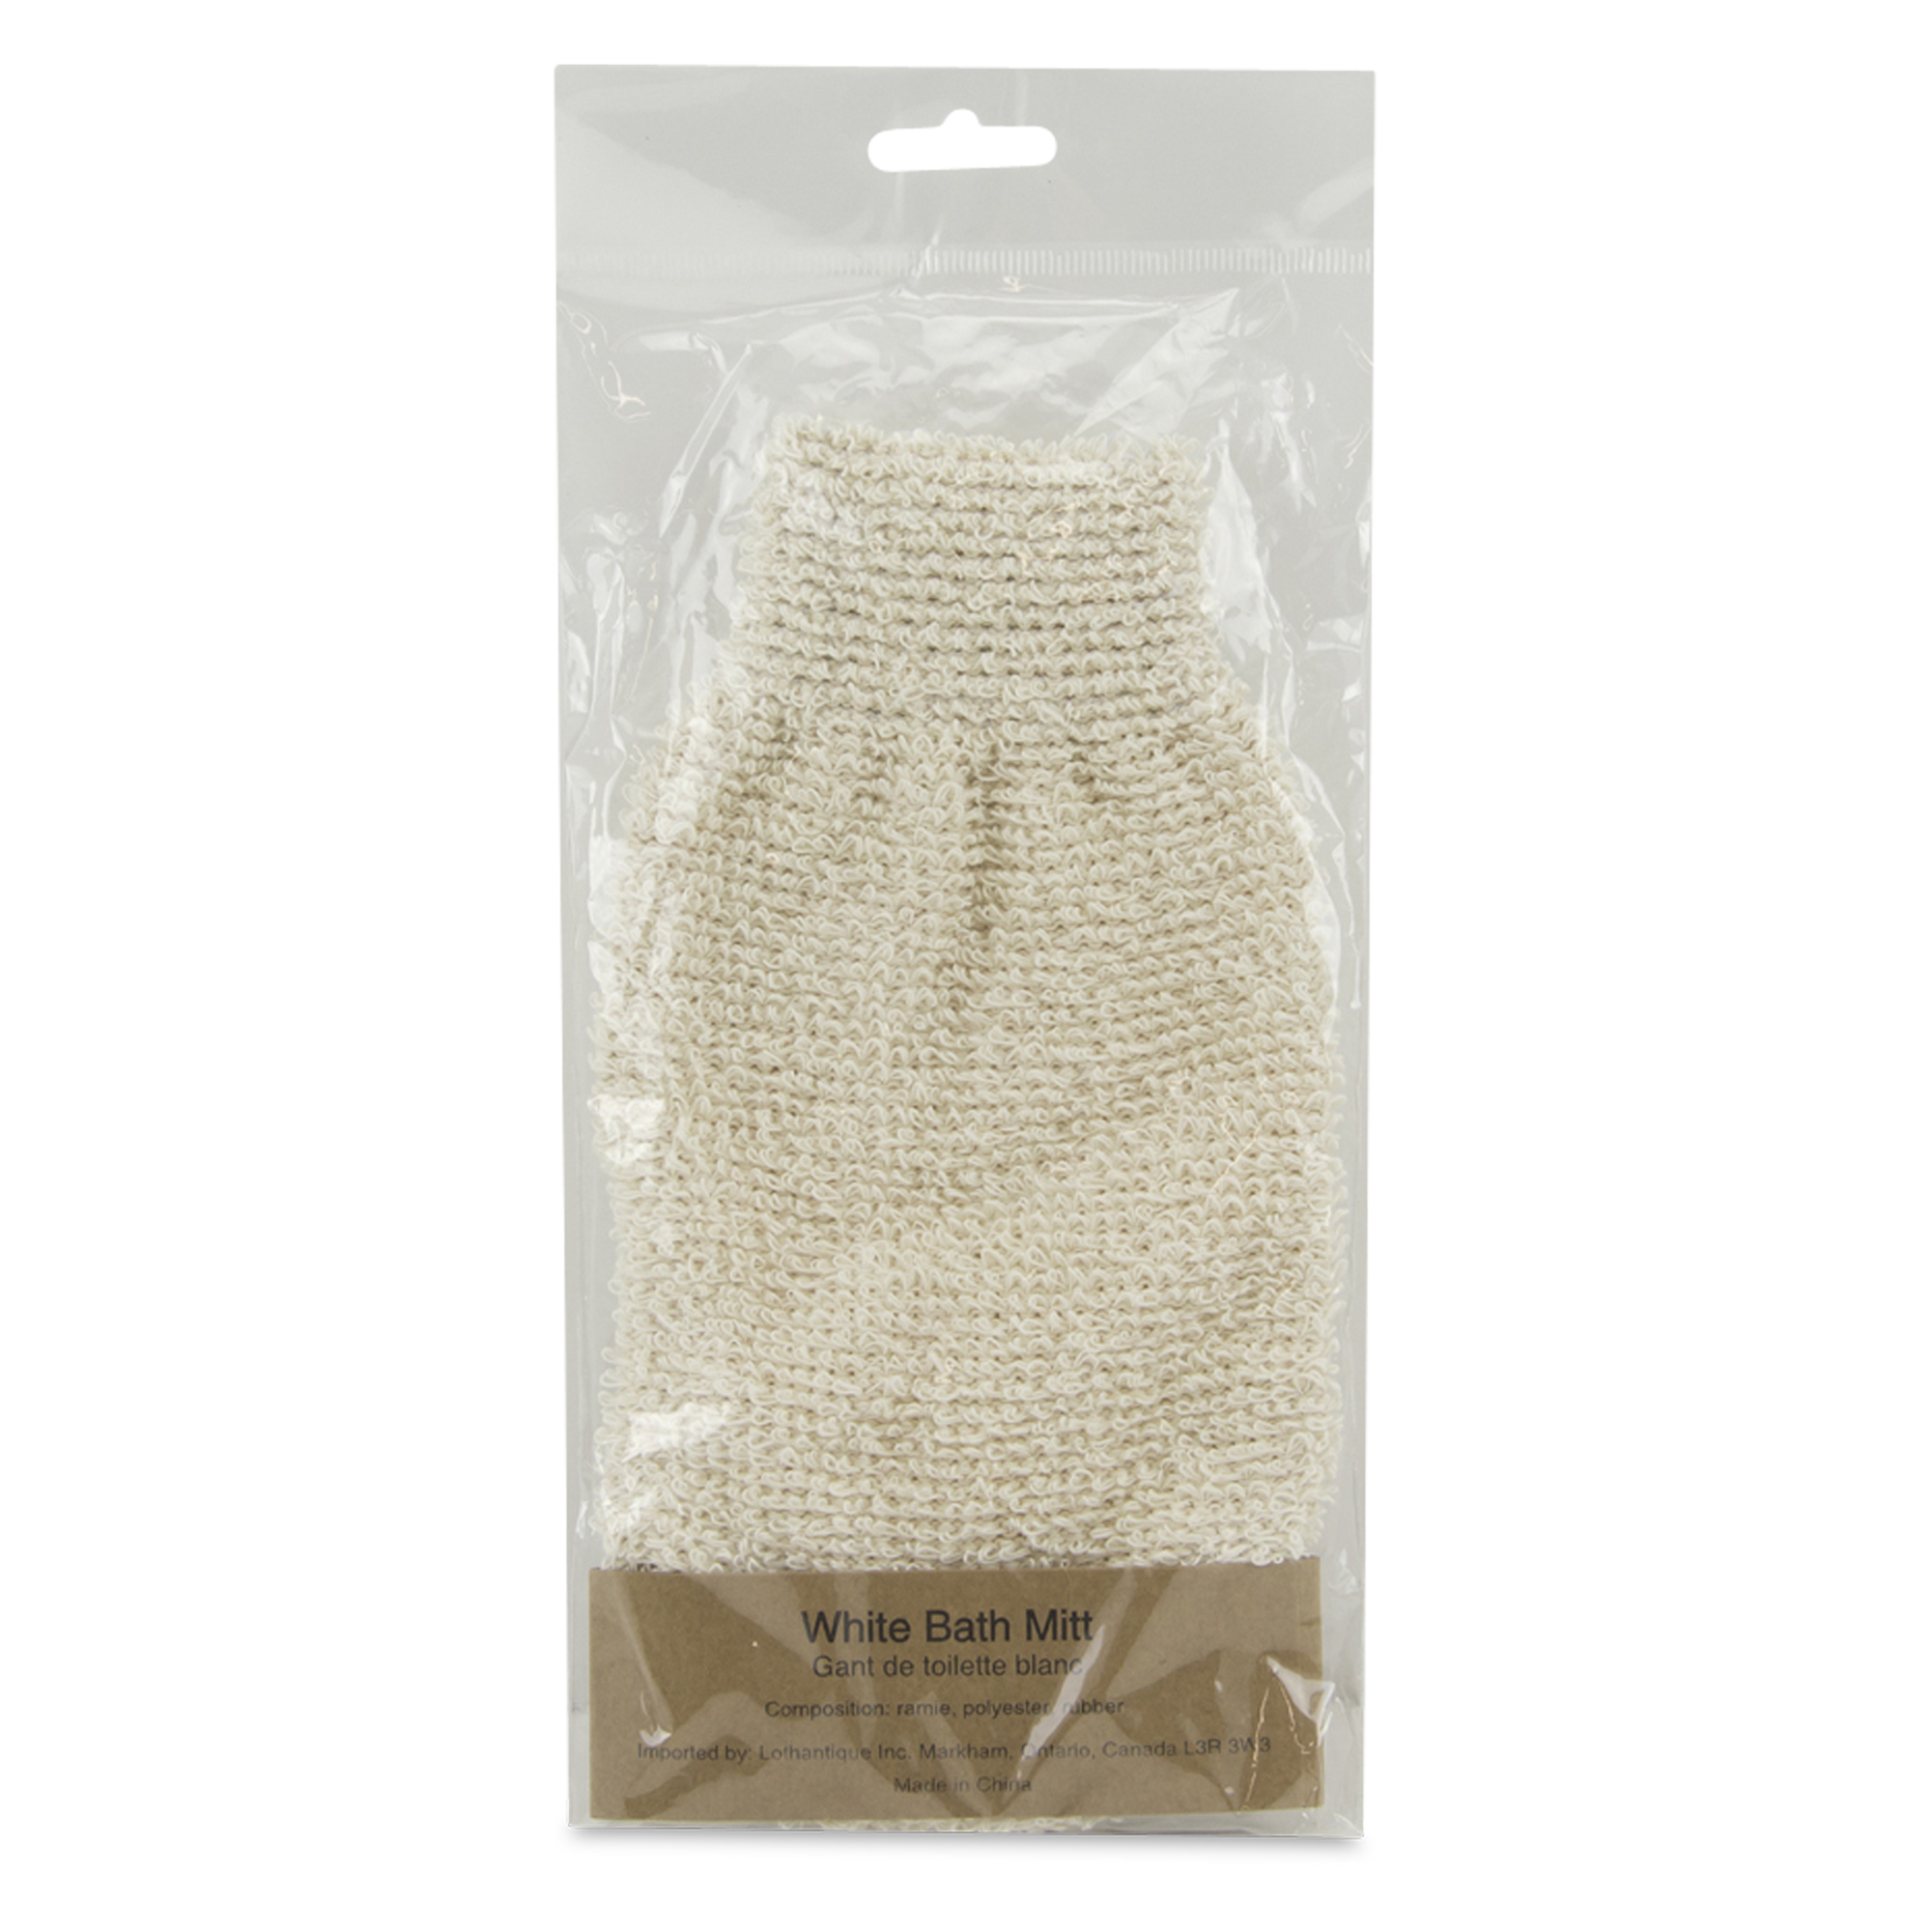 Bath mitt is made of ramie, cotton, polyester and rubber.